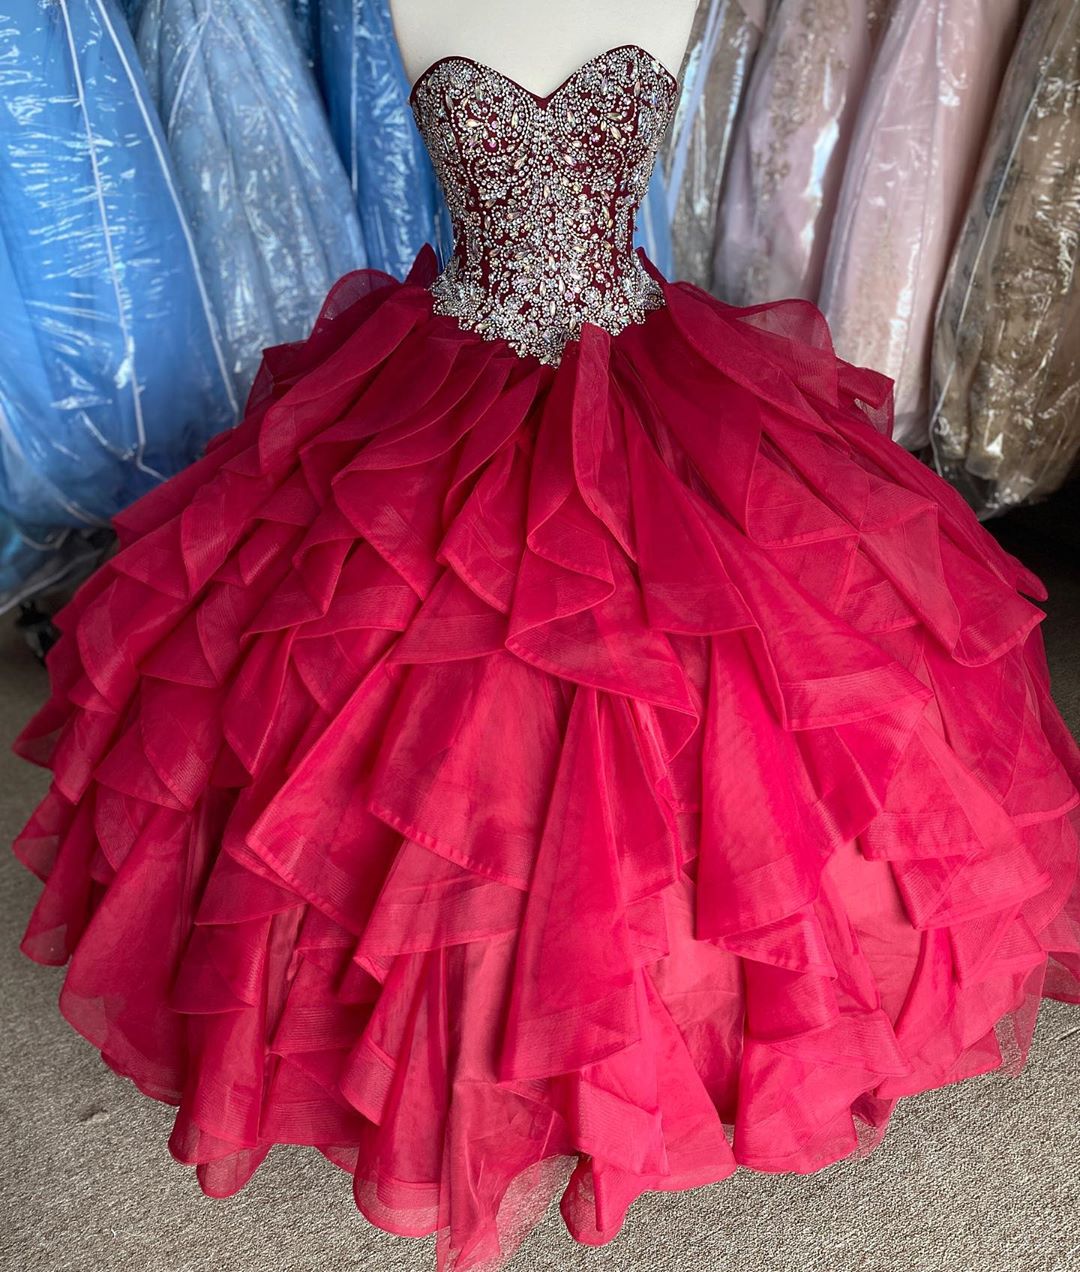 Sweetheart Neckline Full Beaded Bodice Ruffles Horsehair Red Quinceanera Dress Designer - Click Image to Close